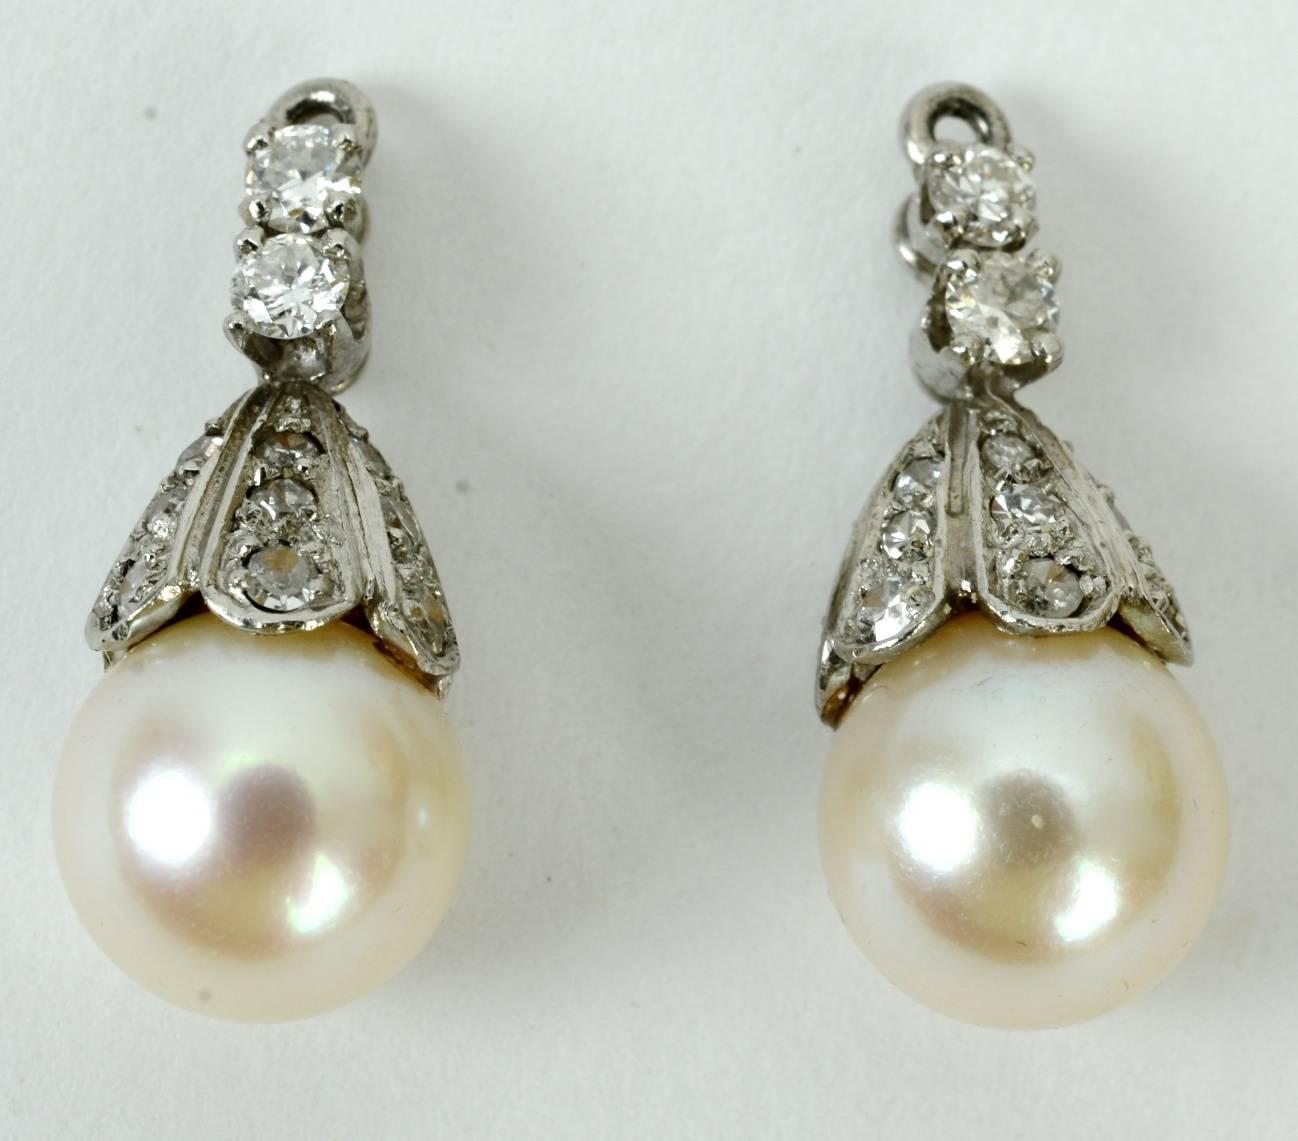 Diamond Earrings with Detachable Pearl and Diamond Drops by Charles Vaillant 3